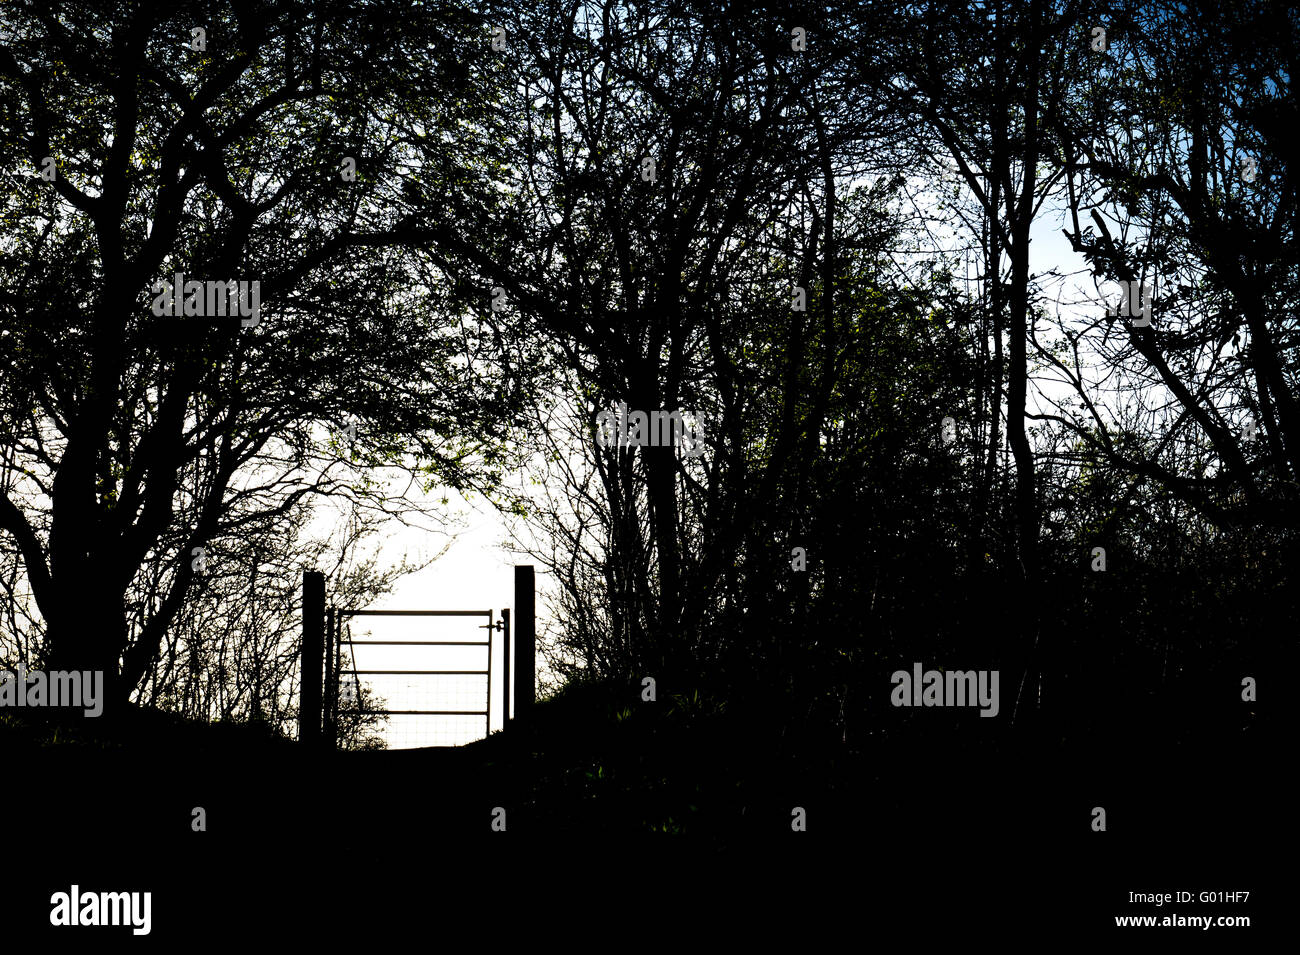 Footpath metal gate and hedgerow silhouette in the Oxfordshire countryside. England Stock Photo